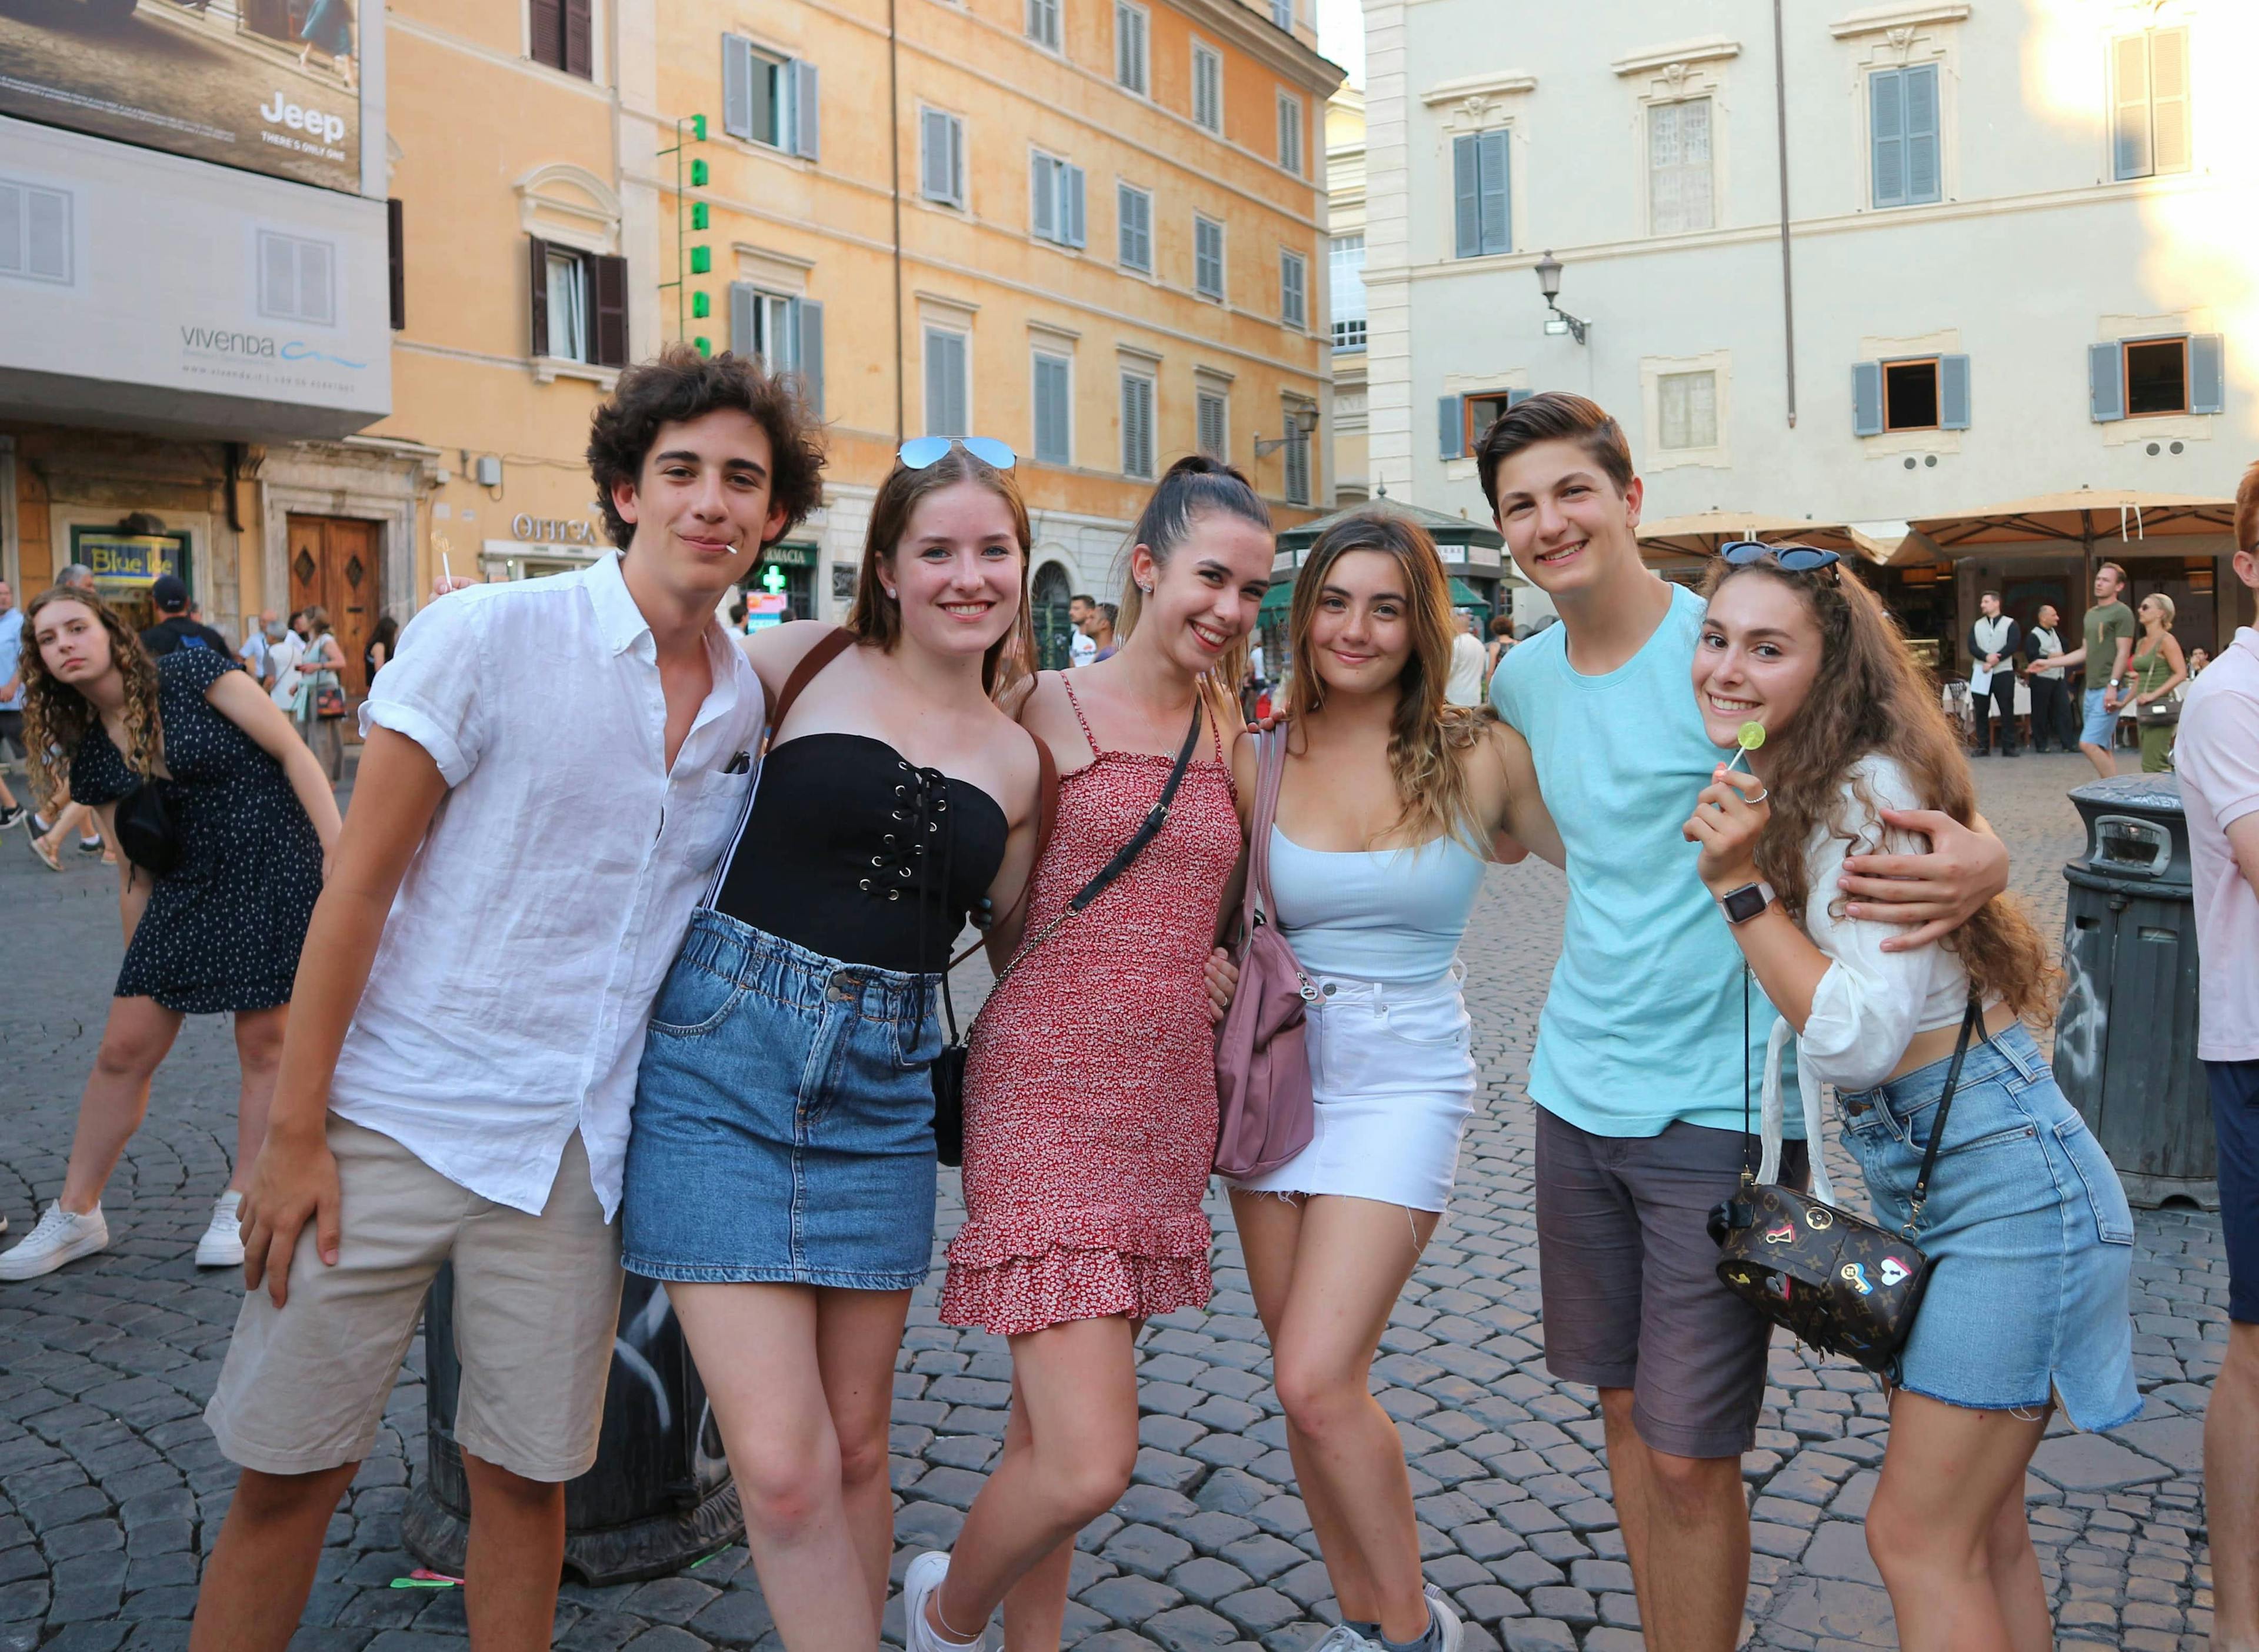 High school students posing for a photo in a piazza in Rome, Italy